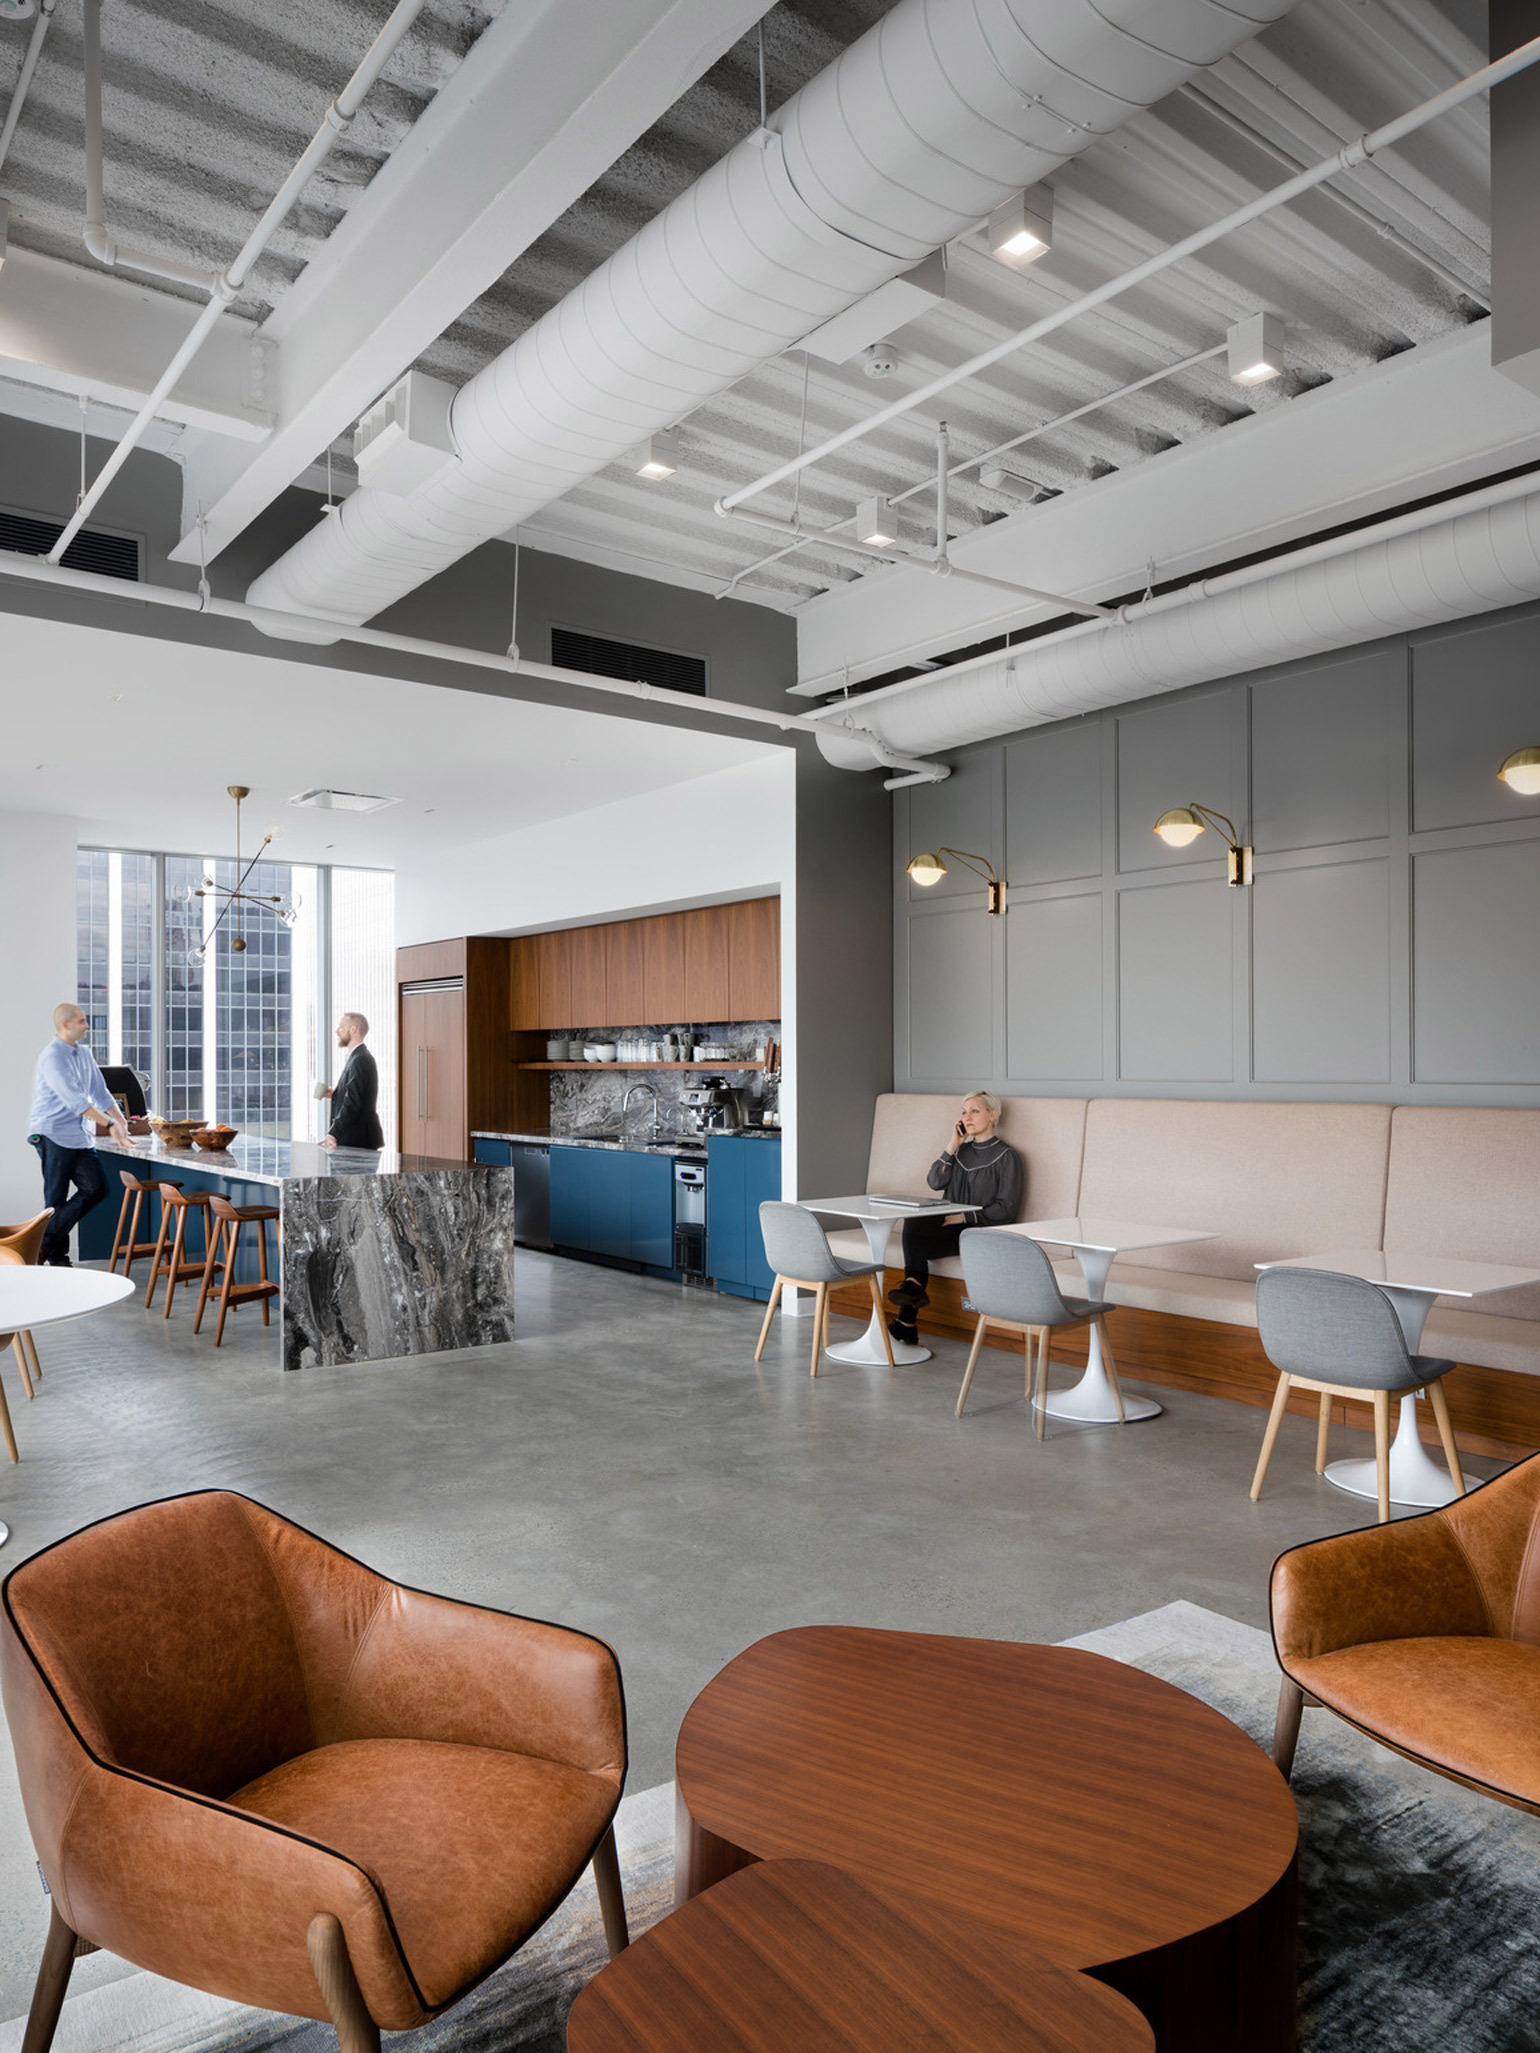 Modern office break room blending industrial and contemporary styles, featuring exposed ceilings, pendant lighting, and a marble kitchen island. Comfortable seating areas with wood tables and leather chairs provide a casual workspace. Employees engage in relaxed conversations.